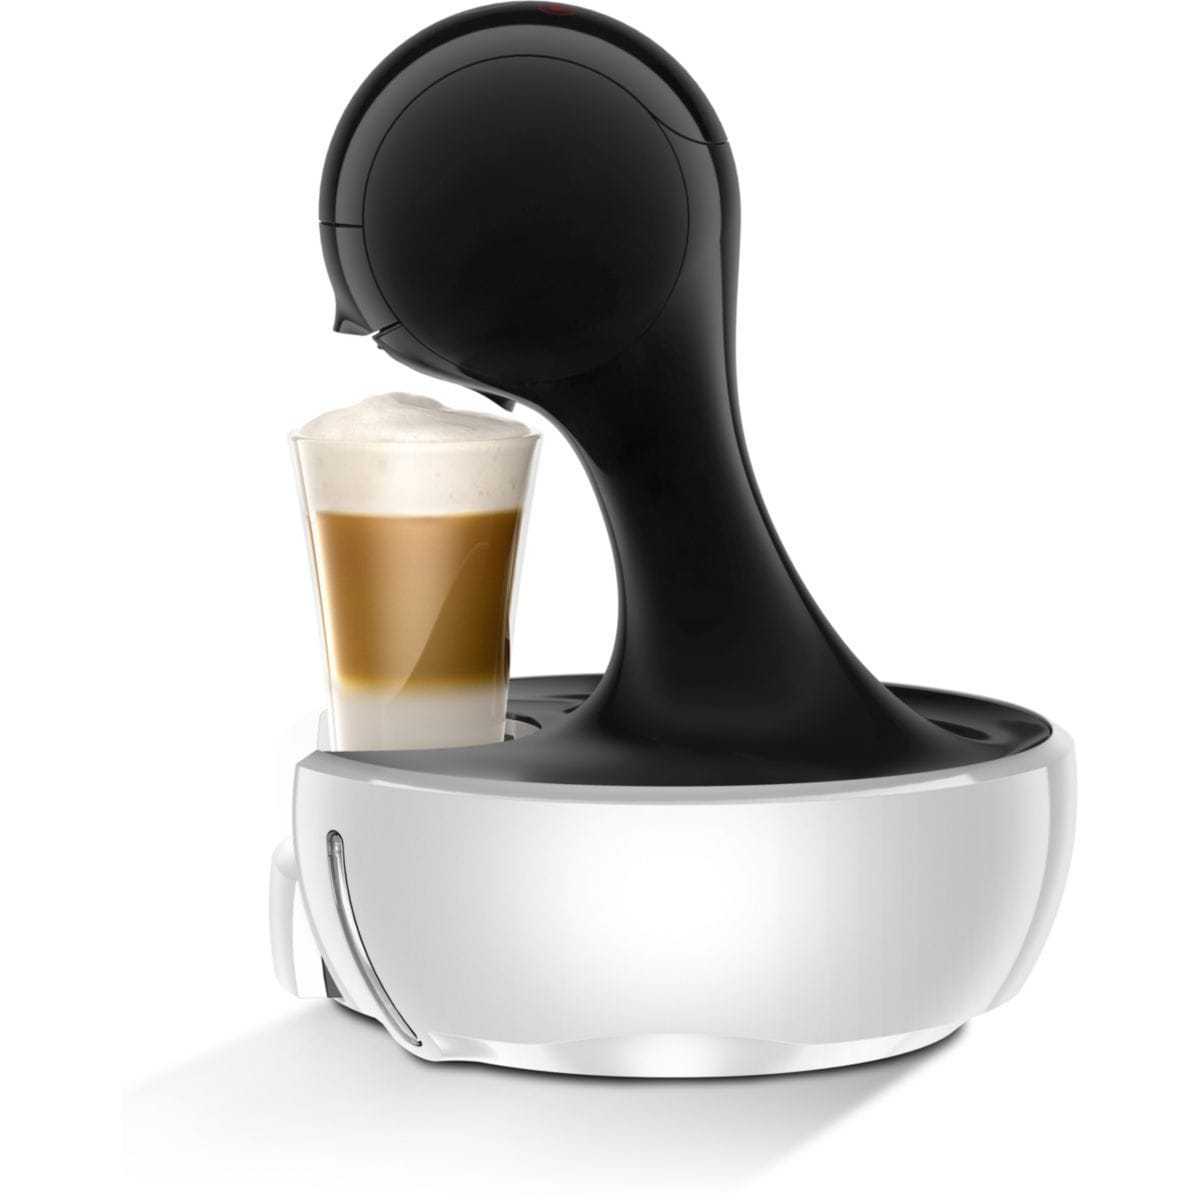 Krups Cafetiere Dolce Gusto  Noirblanc Yy2500fd